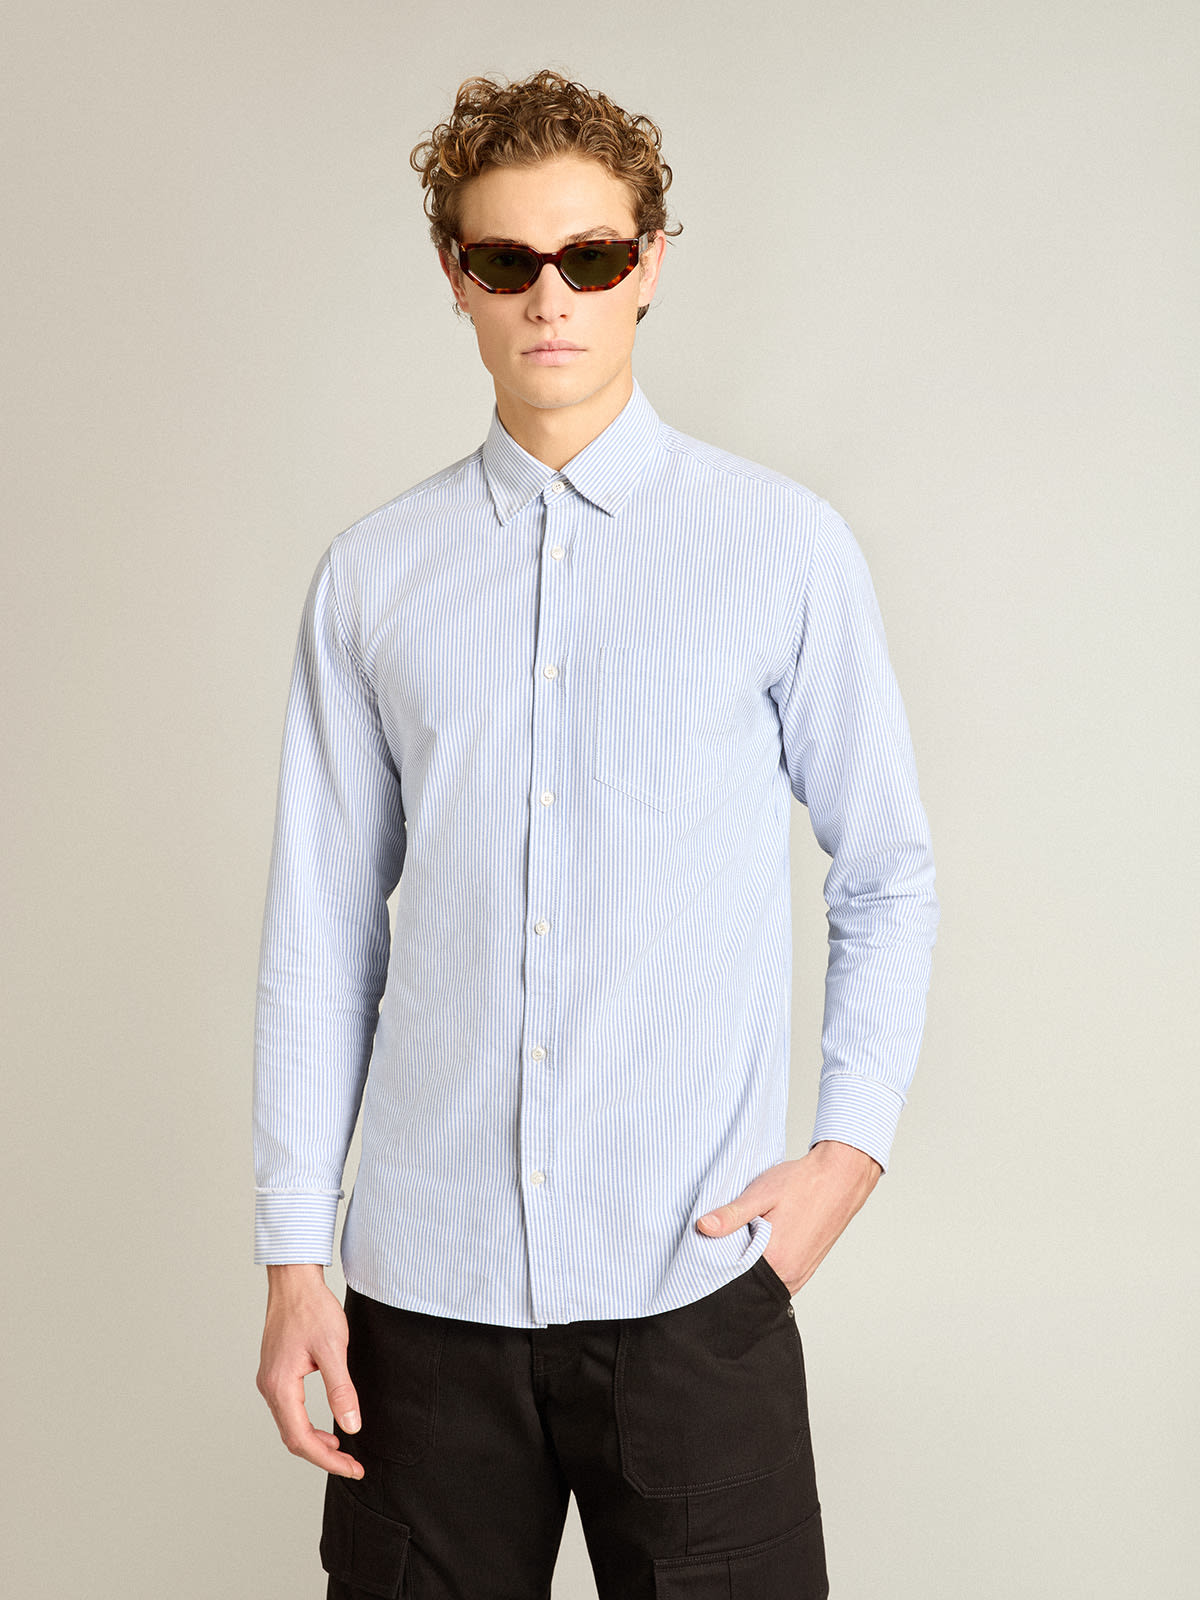 Golden Goose - Men’s shirt with light blue candy stripes in 